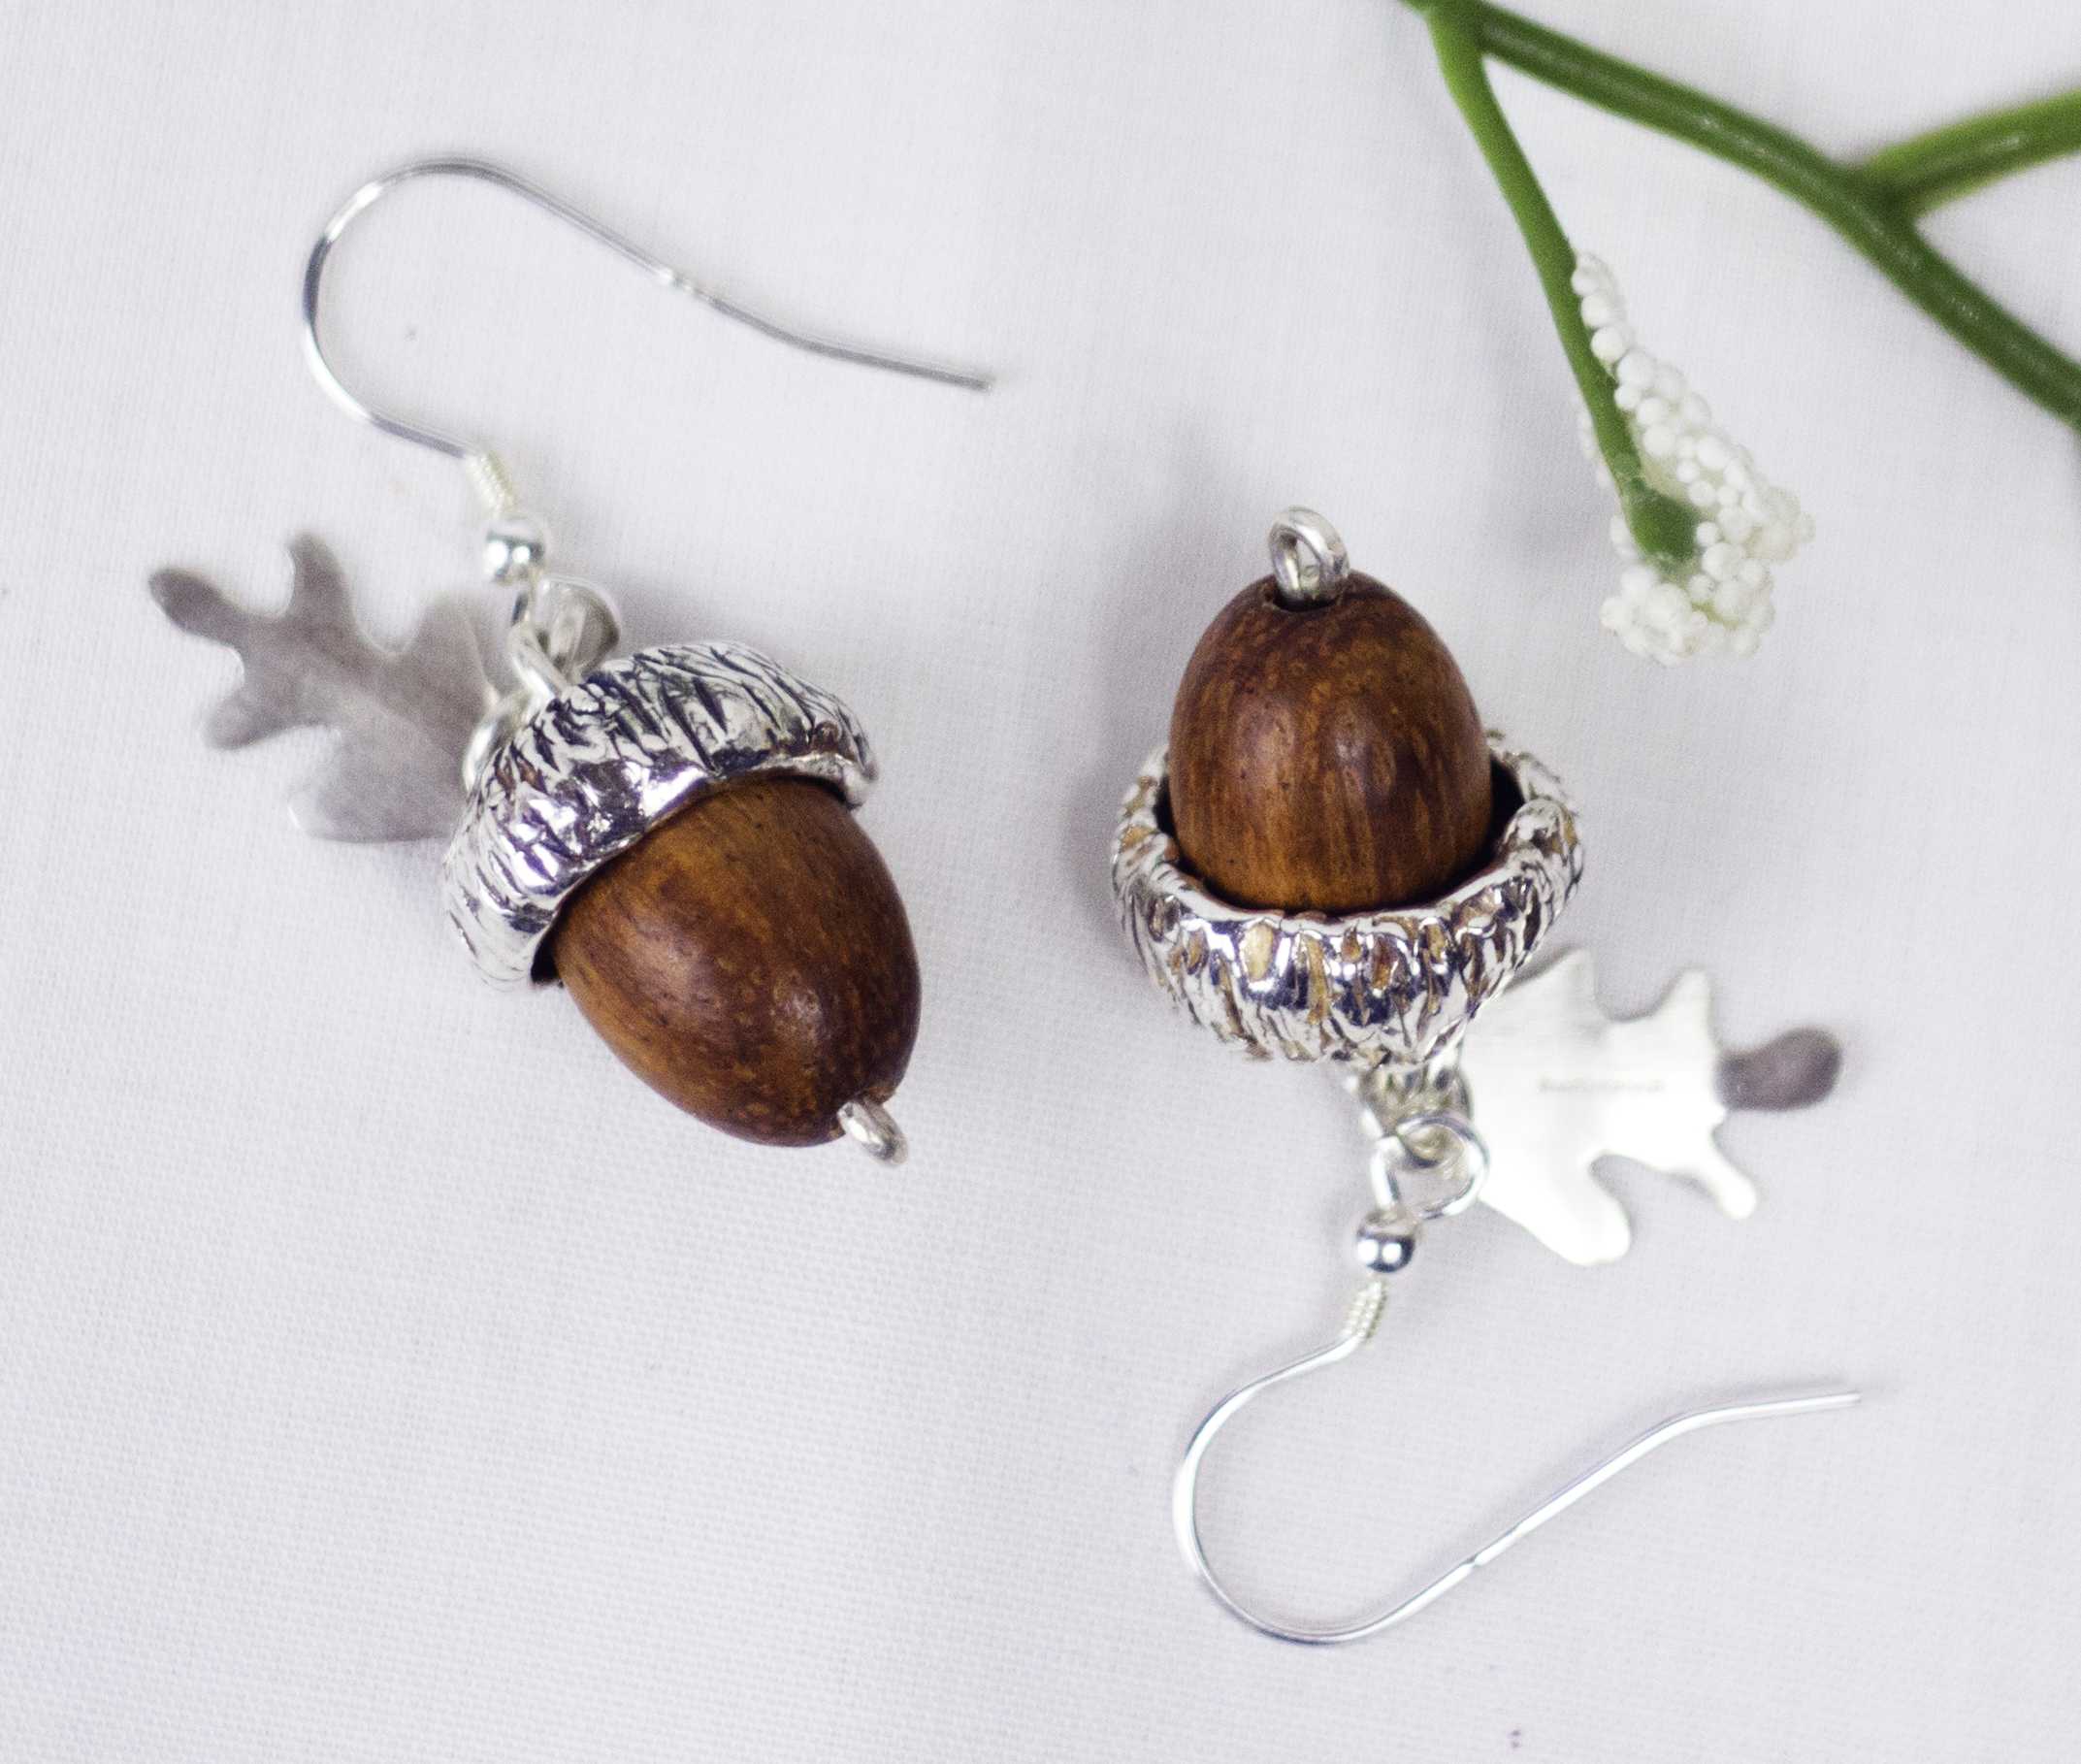 Acorn Earrings with wooden bead centre